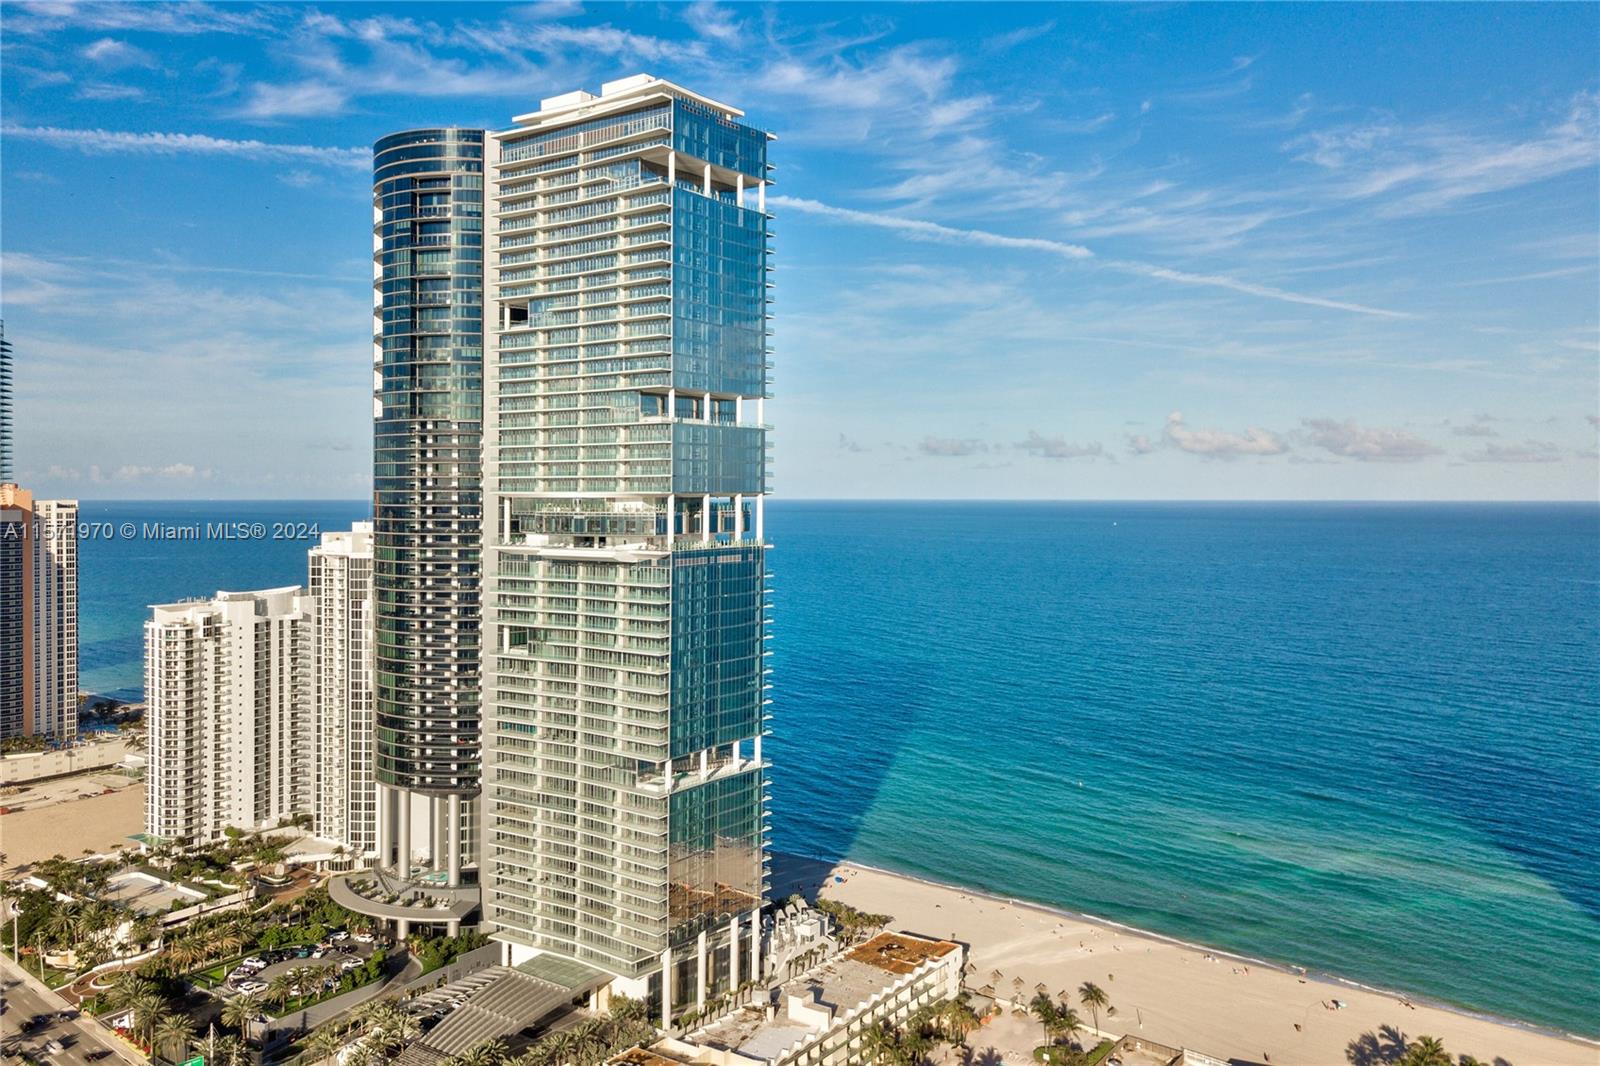 Ultra-luxury, beachfront Turnberry Ocean Club Residence, one of the most Exclusive Oceanfront building in Sunny Isles Beach. Offering a lifestyle of luxury and sophistication like none other. Unit 1503 is a 3 BED/4.5 Bath + DEN. This flow-through residence offers unique 12' ceilings, higher than most units in the building. Direct Ocean & Intracoastal Views. Elegant Italian Porcelain flooring, new custom made closets & modern motorized windows treatments. Top-of-the-line Gaggenau® appliances. Wine cooler. Steam shower in master. Summer kitchen in sunrise terrace. Storage. Building offers 6 floors of first-class amenities: 3 swimming pools, private dining, SPA, fitness center, dog park, kid's room, theater. Beach service included.Breakfast serve every morning. UNFURNISHED. AVAILABLE.